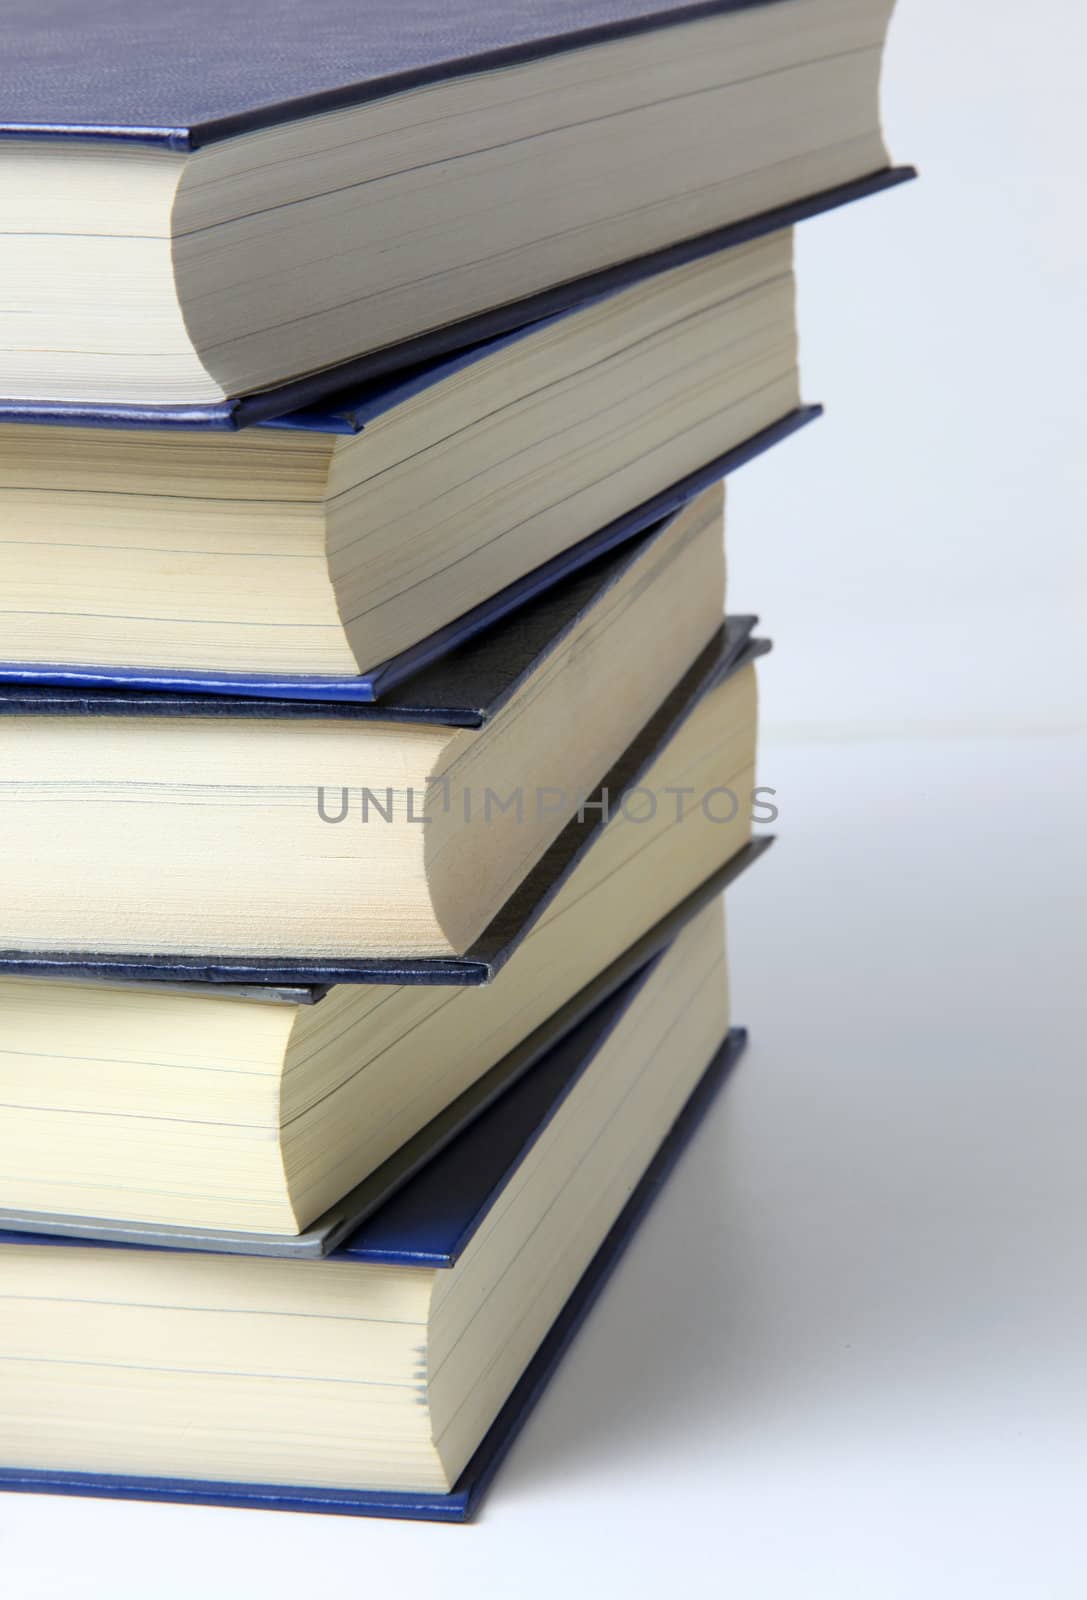 Several books lying one upon another. All on white background.